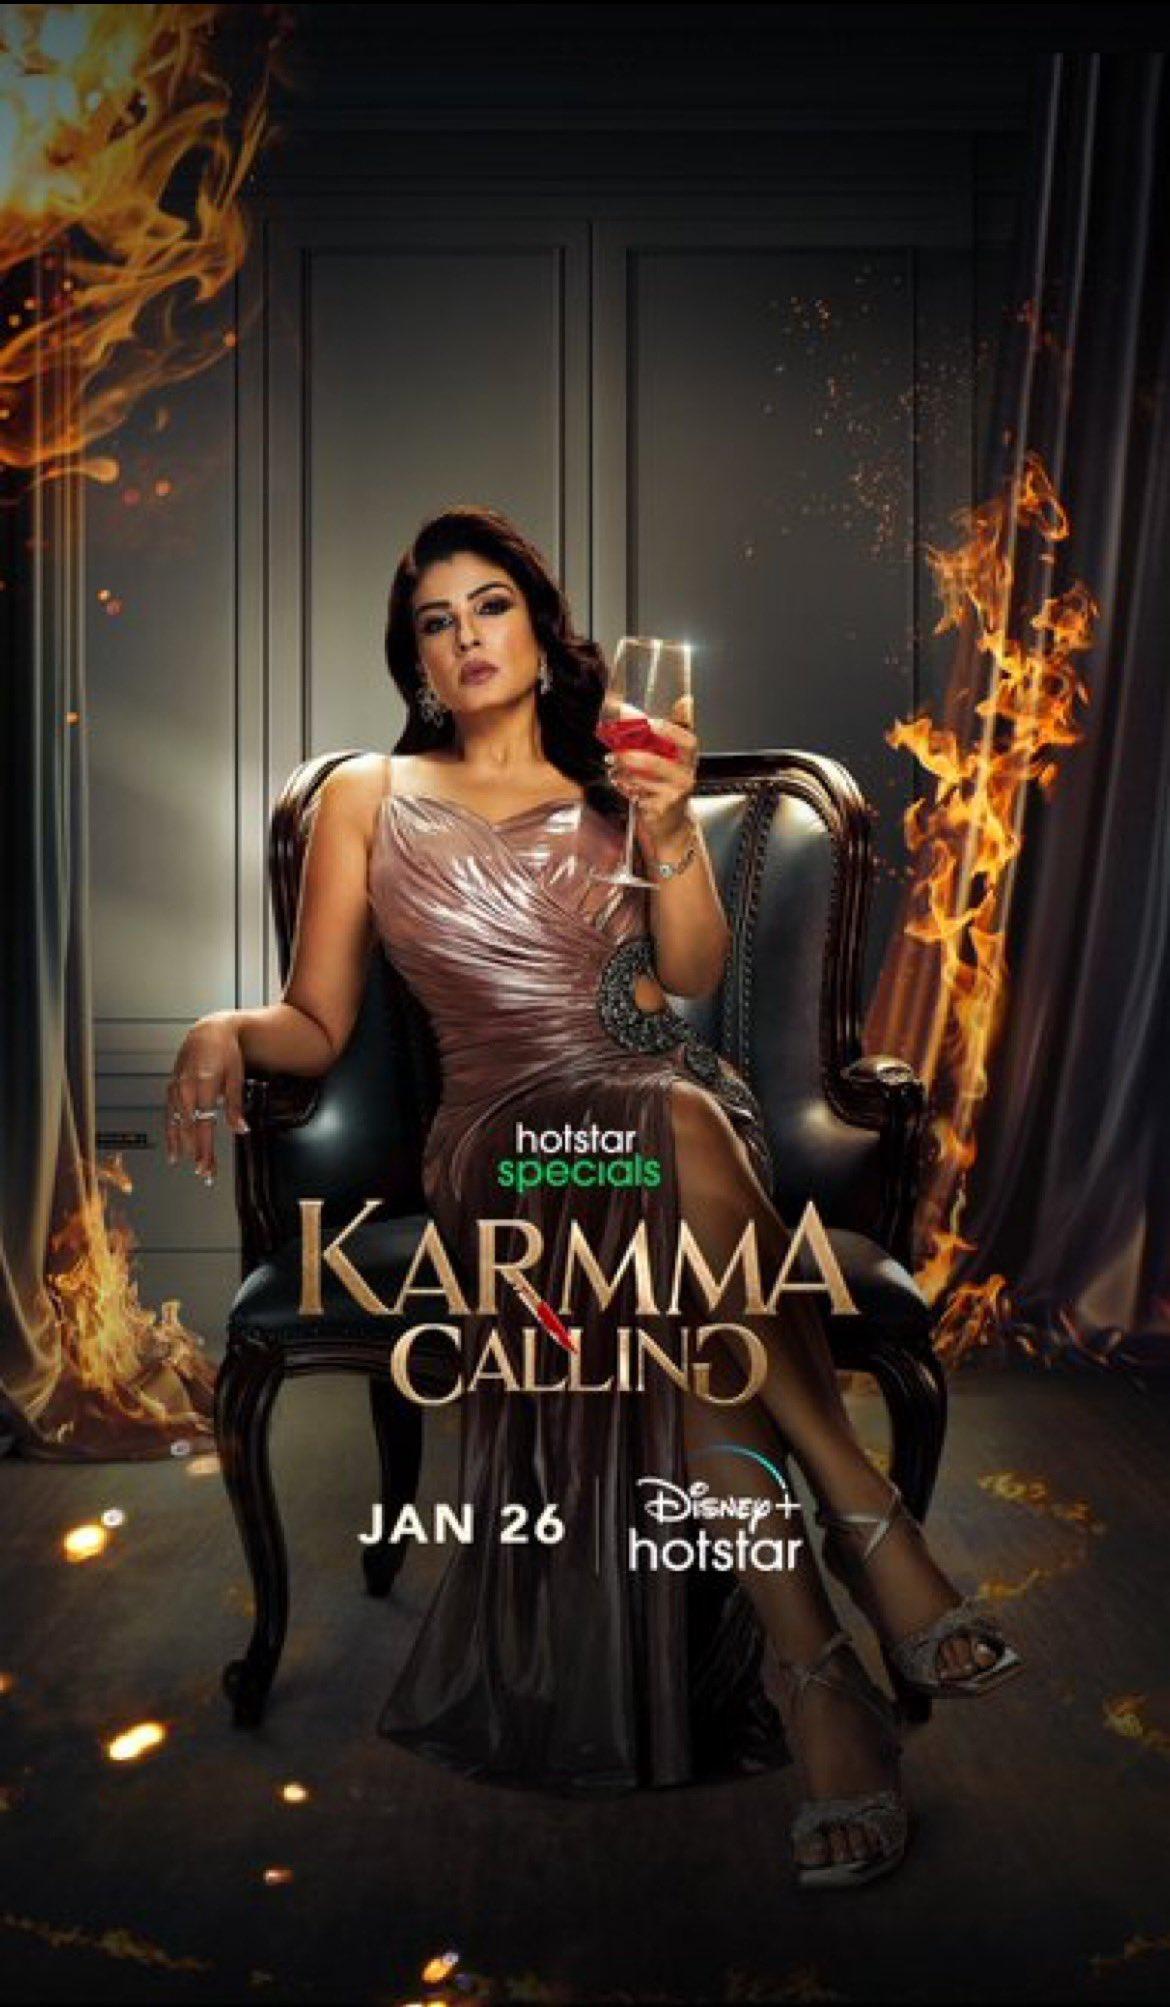 Karmma Calling (January 26) - Streaming on Disney+ HotstarKarmma Calling is a gripping tale of retribution set in the glamorous and treacherous world of Alibaug’s high society. Adapted from the American series 